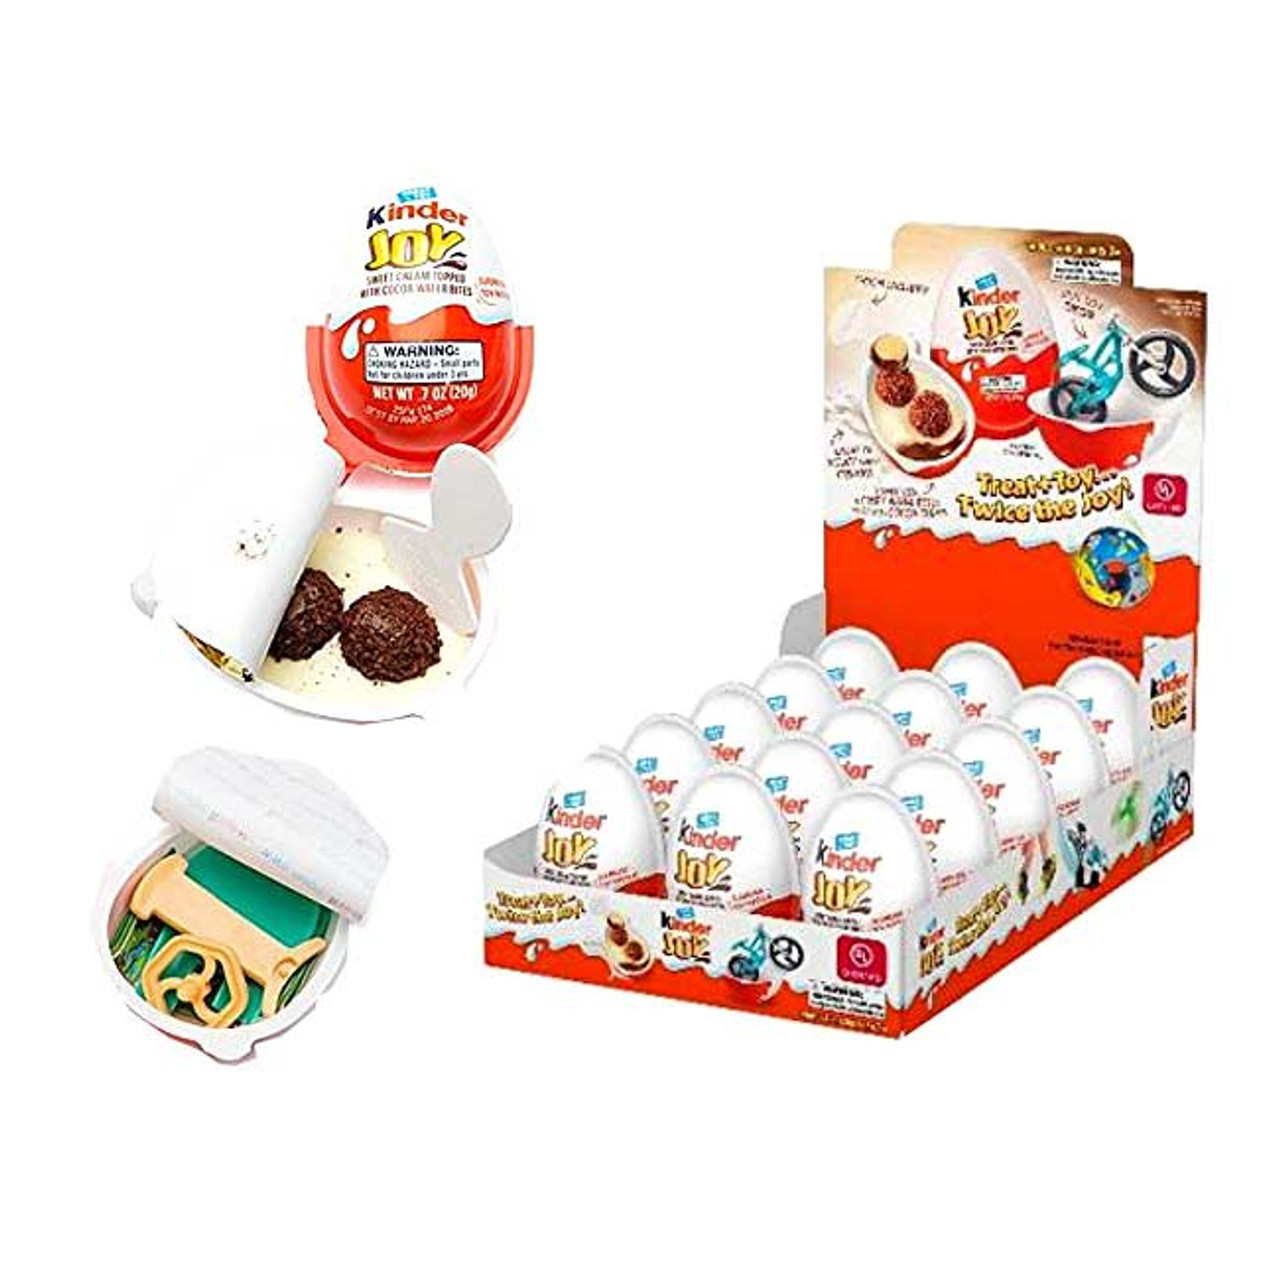 https://cdn11.bigcommerce.com/s-omwfd2x16c/images/stencil/1280x1280/products/8390/9345/kinder-joy-eggs-15-count-42__71037.1623949501.jpg?c=1